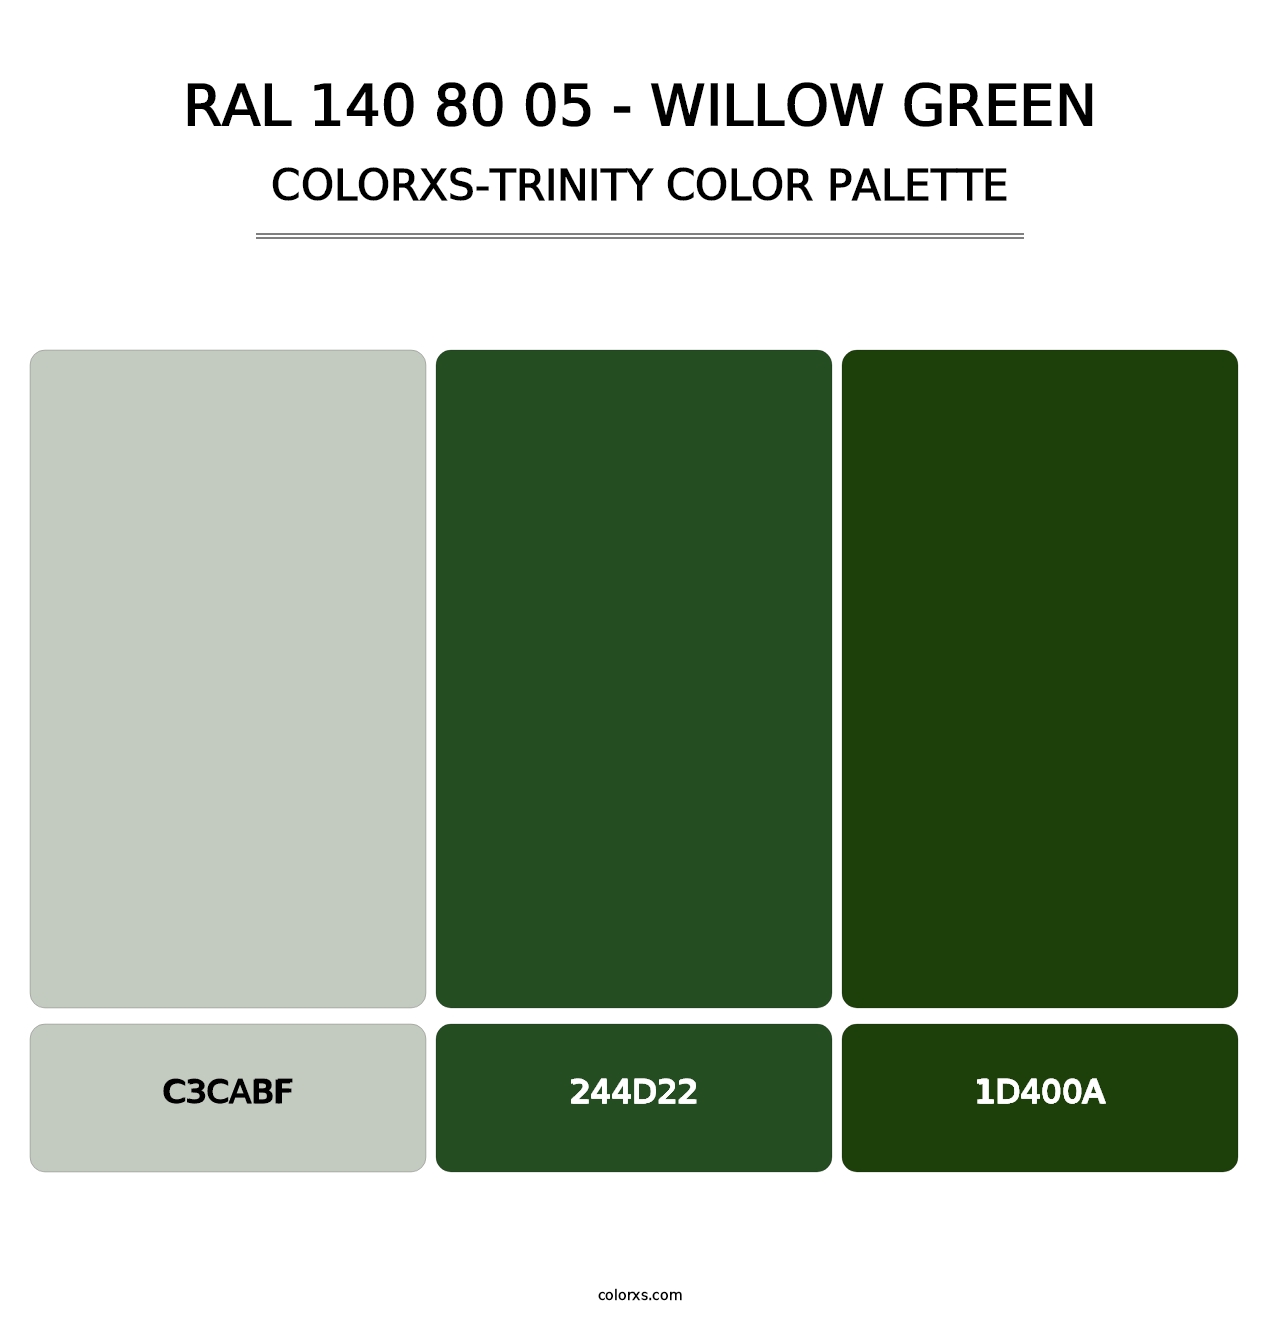 RAL 140 80 05 - Willow Green - Colorxs Trinity Palette